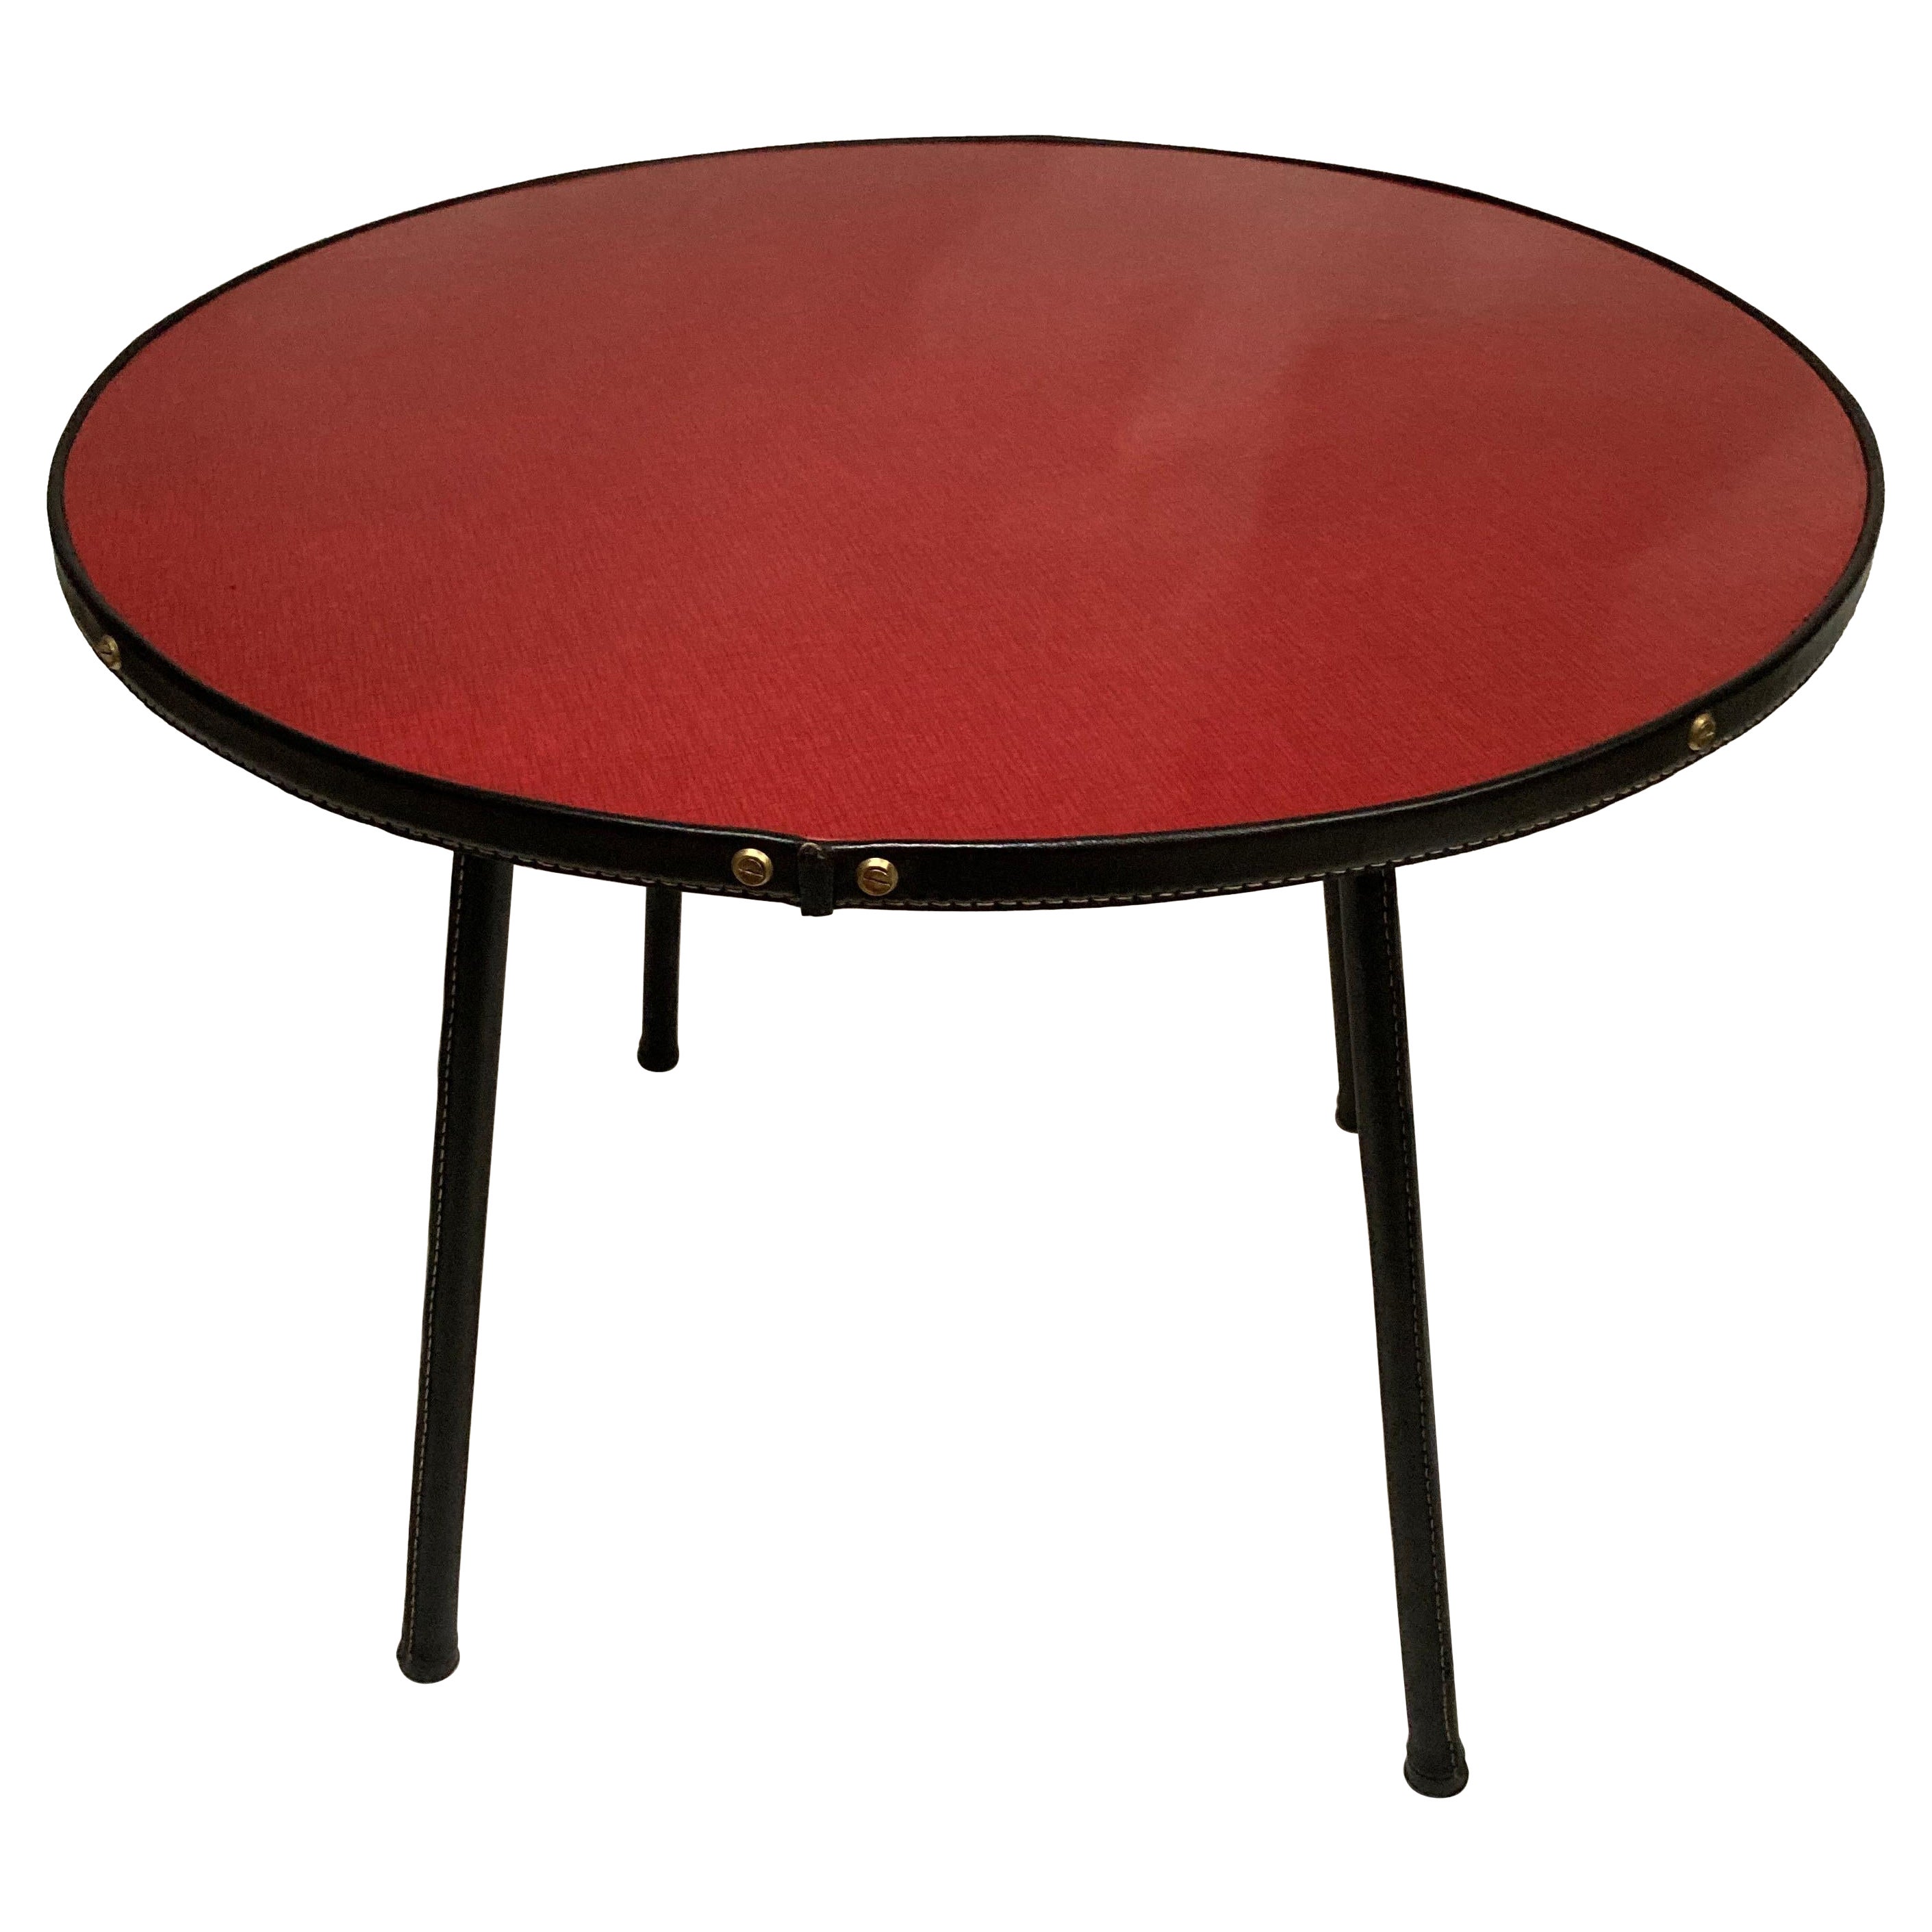 1950's Stitched Leather and formica Circular table by Jacques Adnet